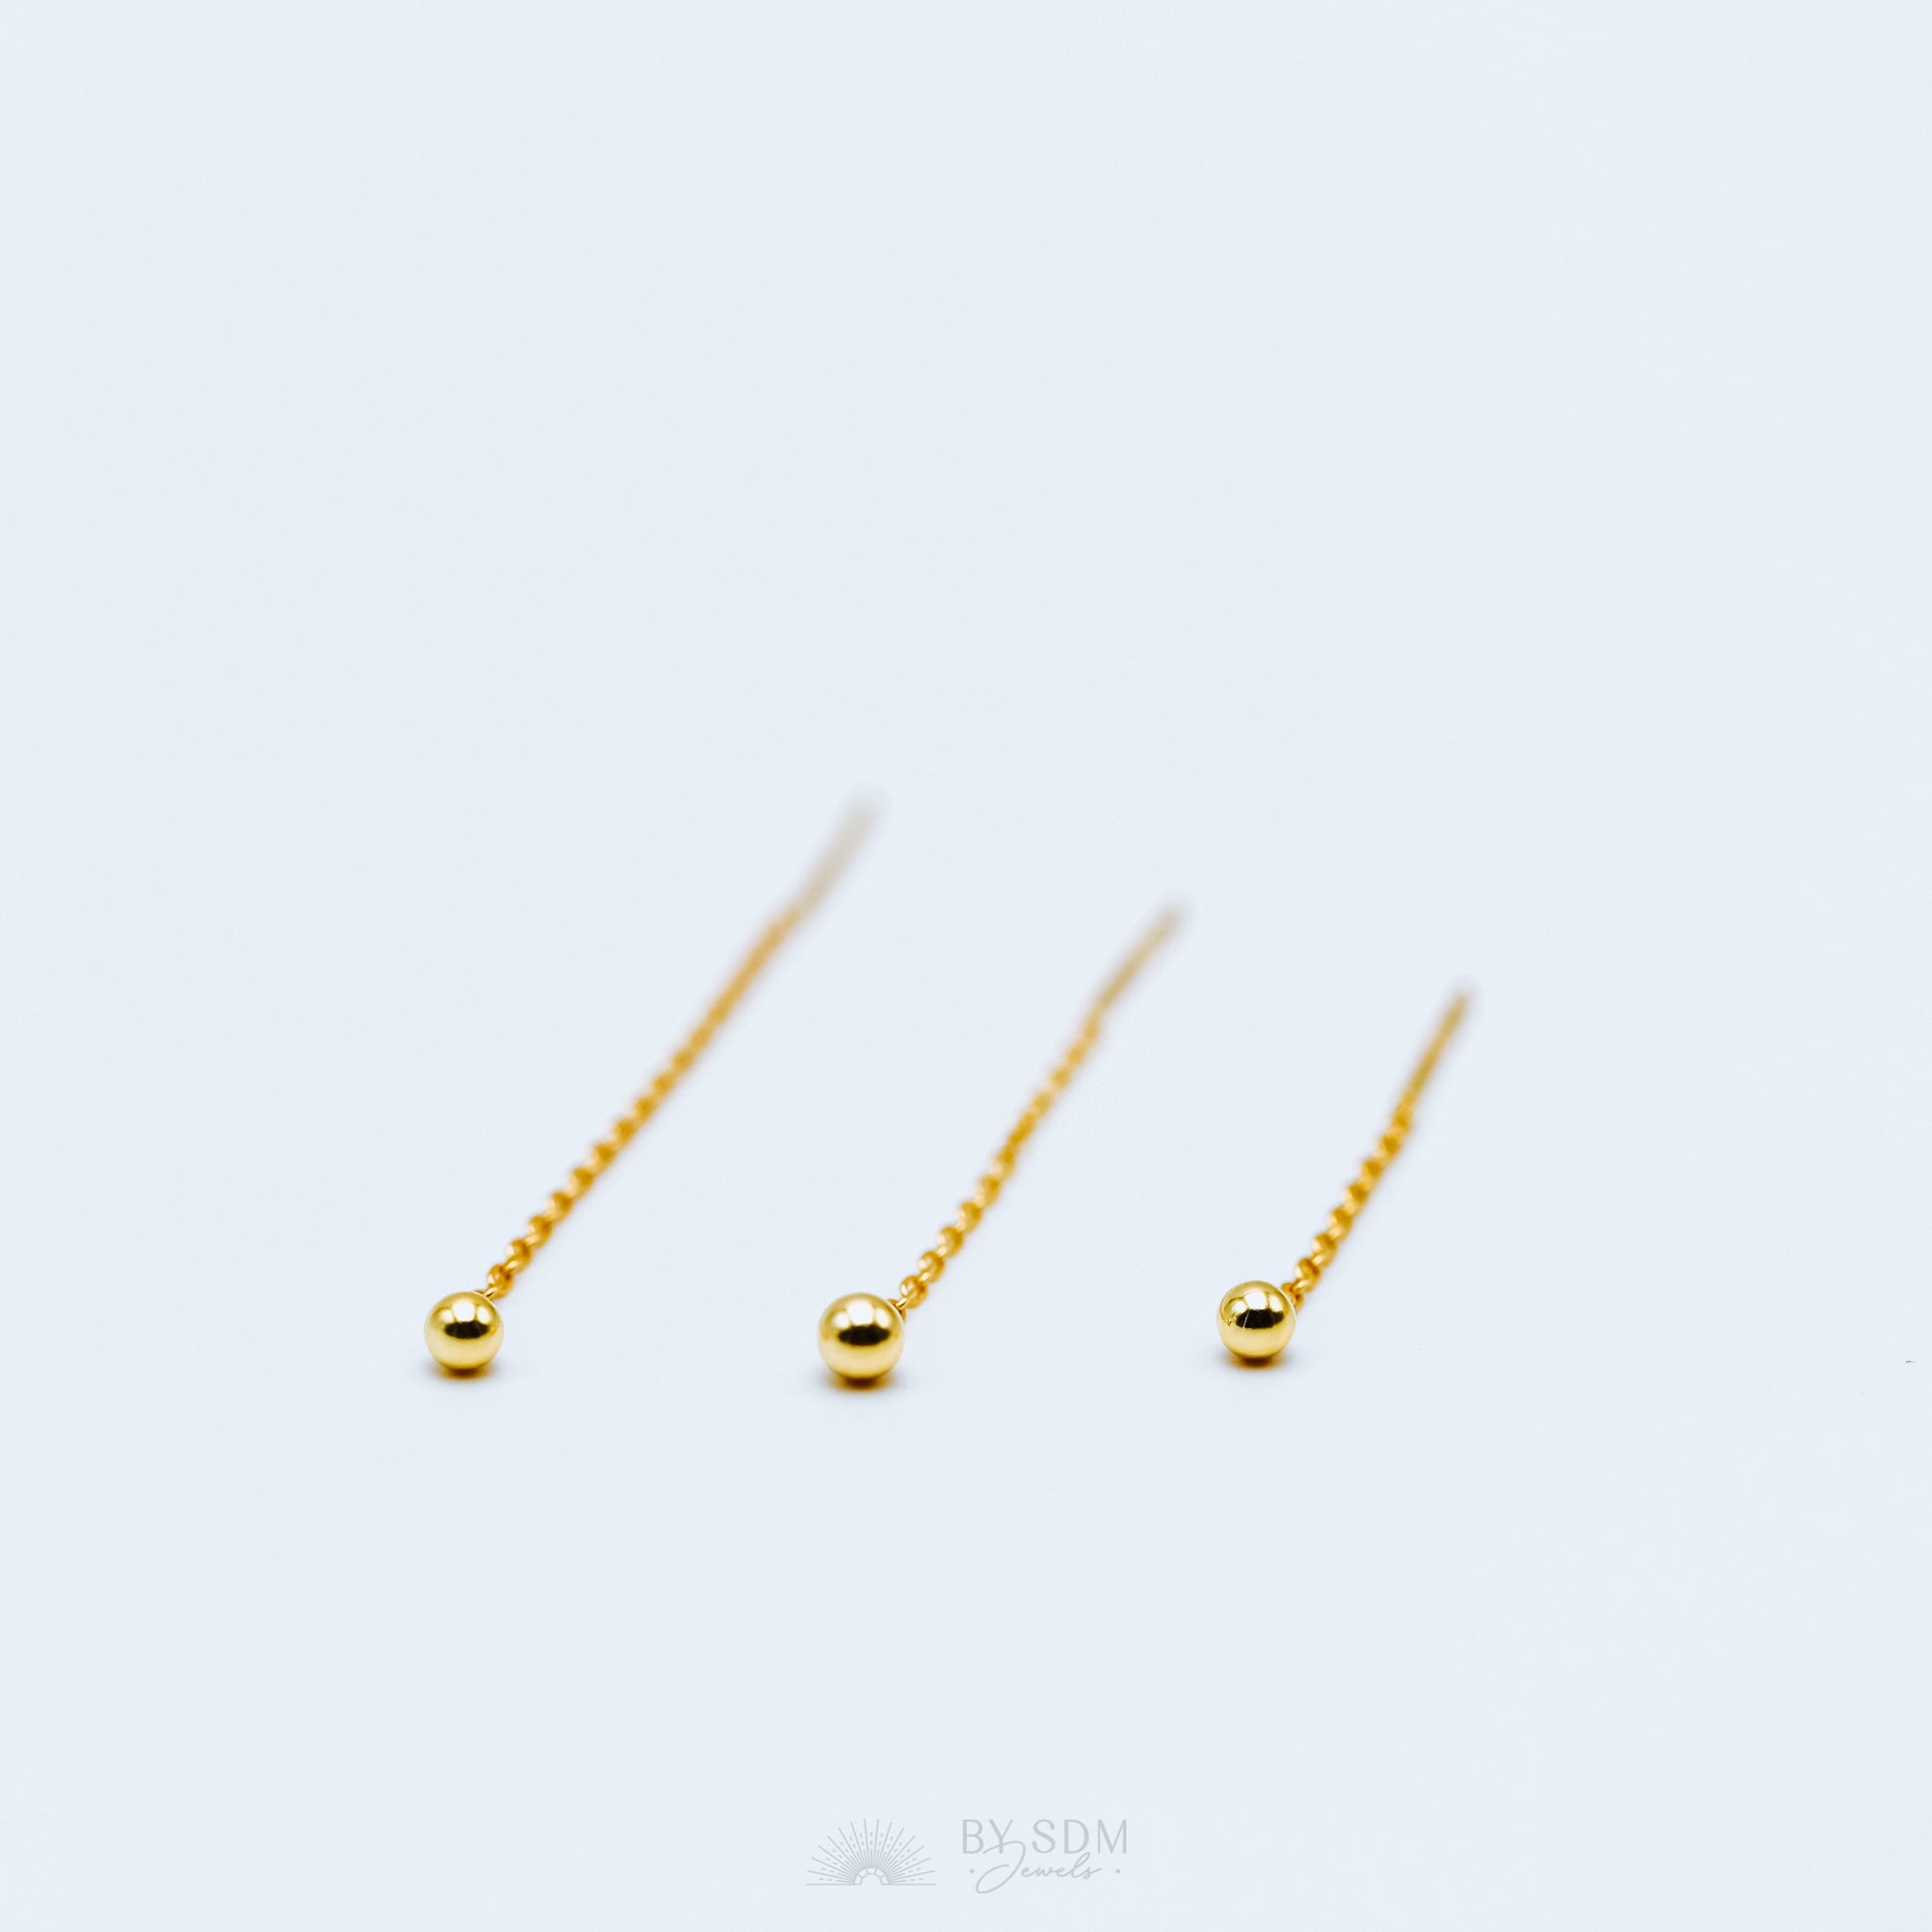 Tiny Ball Ear Threader • Gold, Silver from 160mm to 35mm Lenhgt